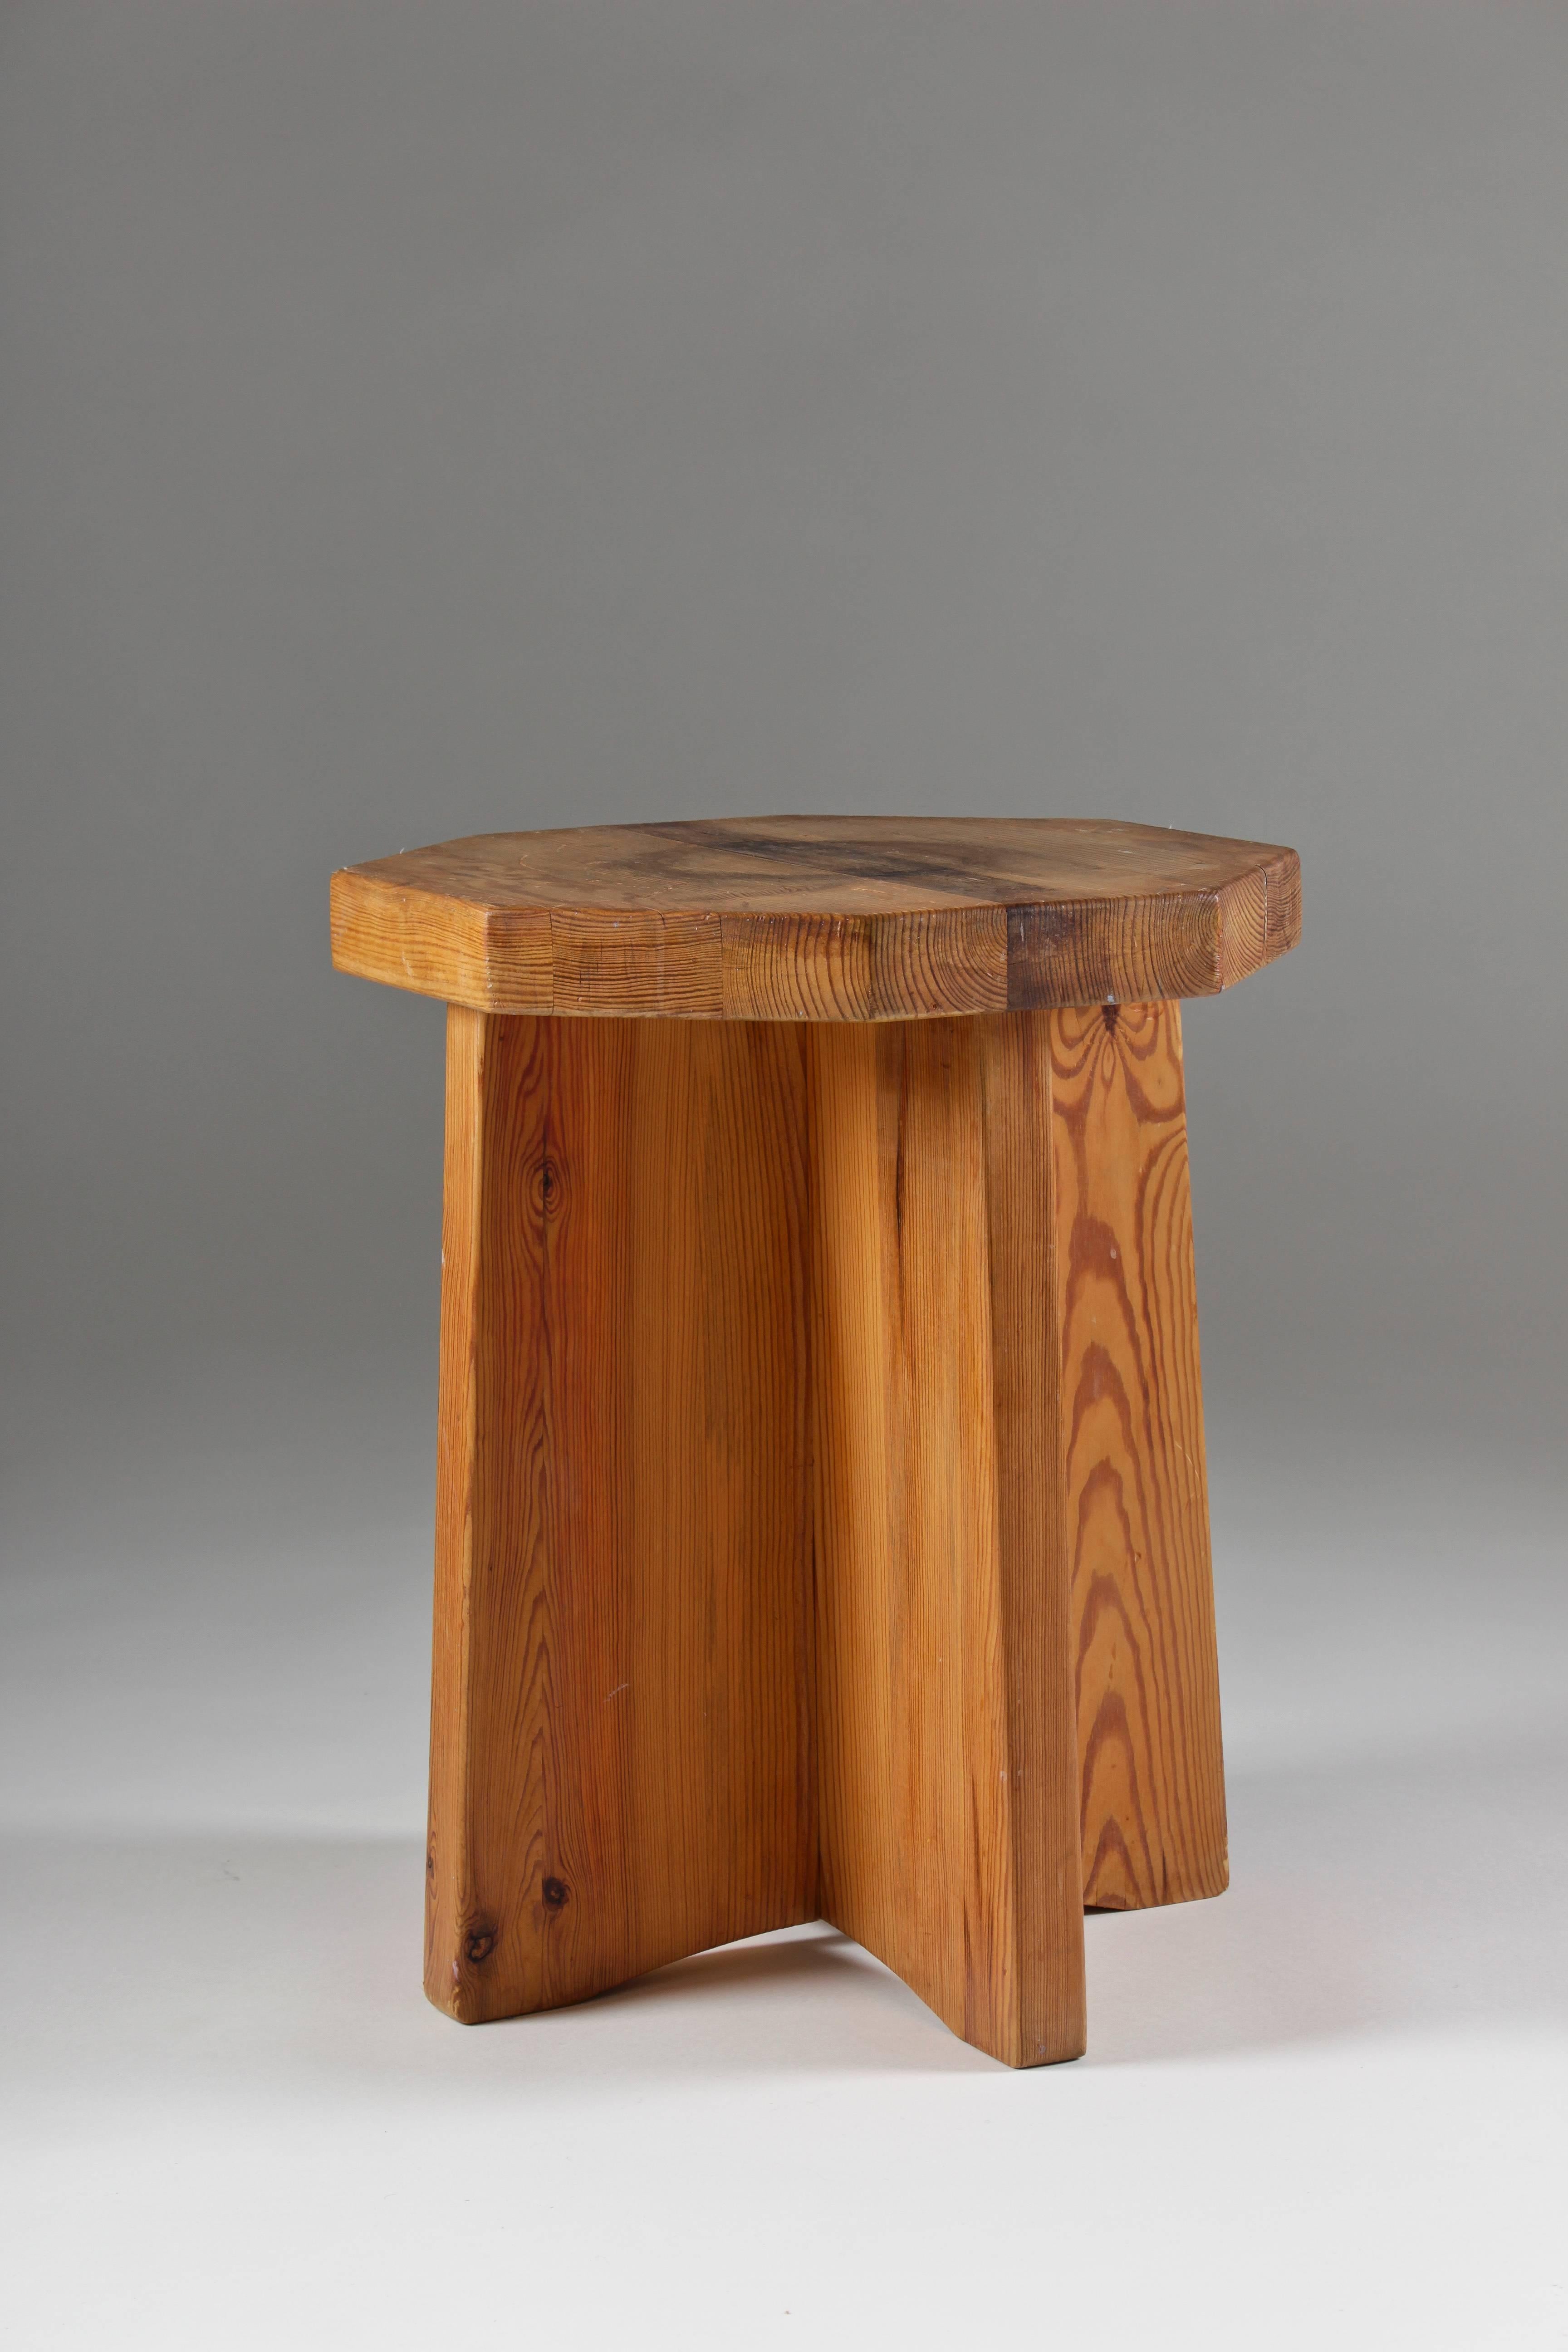 Beautiful side table or stool in the manner of Axel Einar Hjorth. The table is made of solid pinewood and shows a beautiful patina.